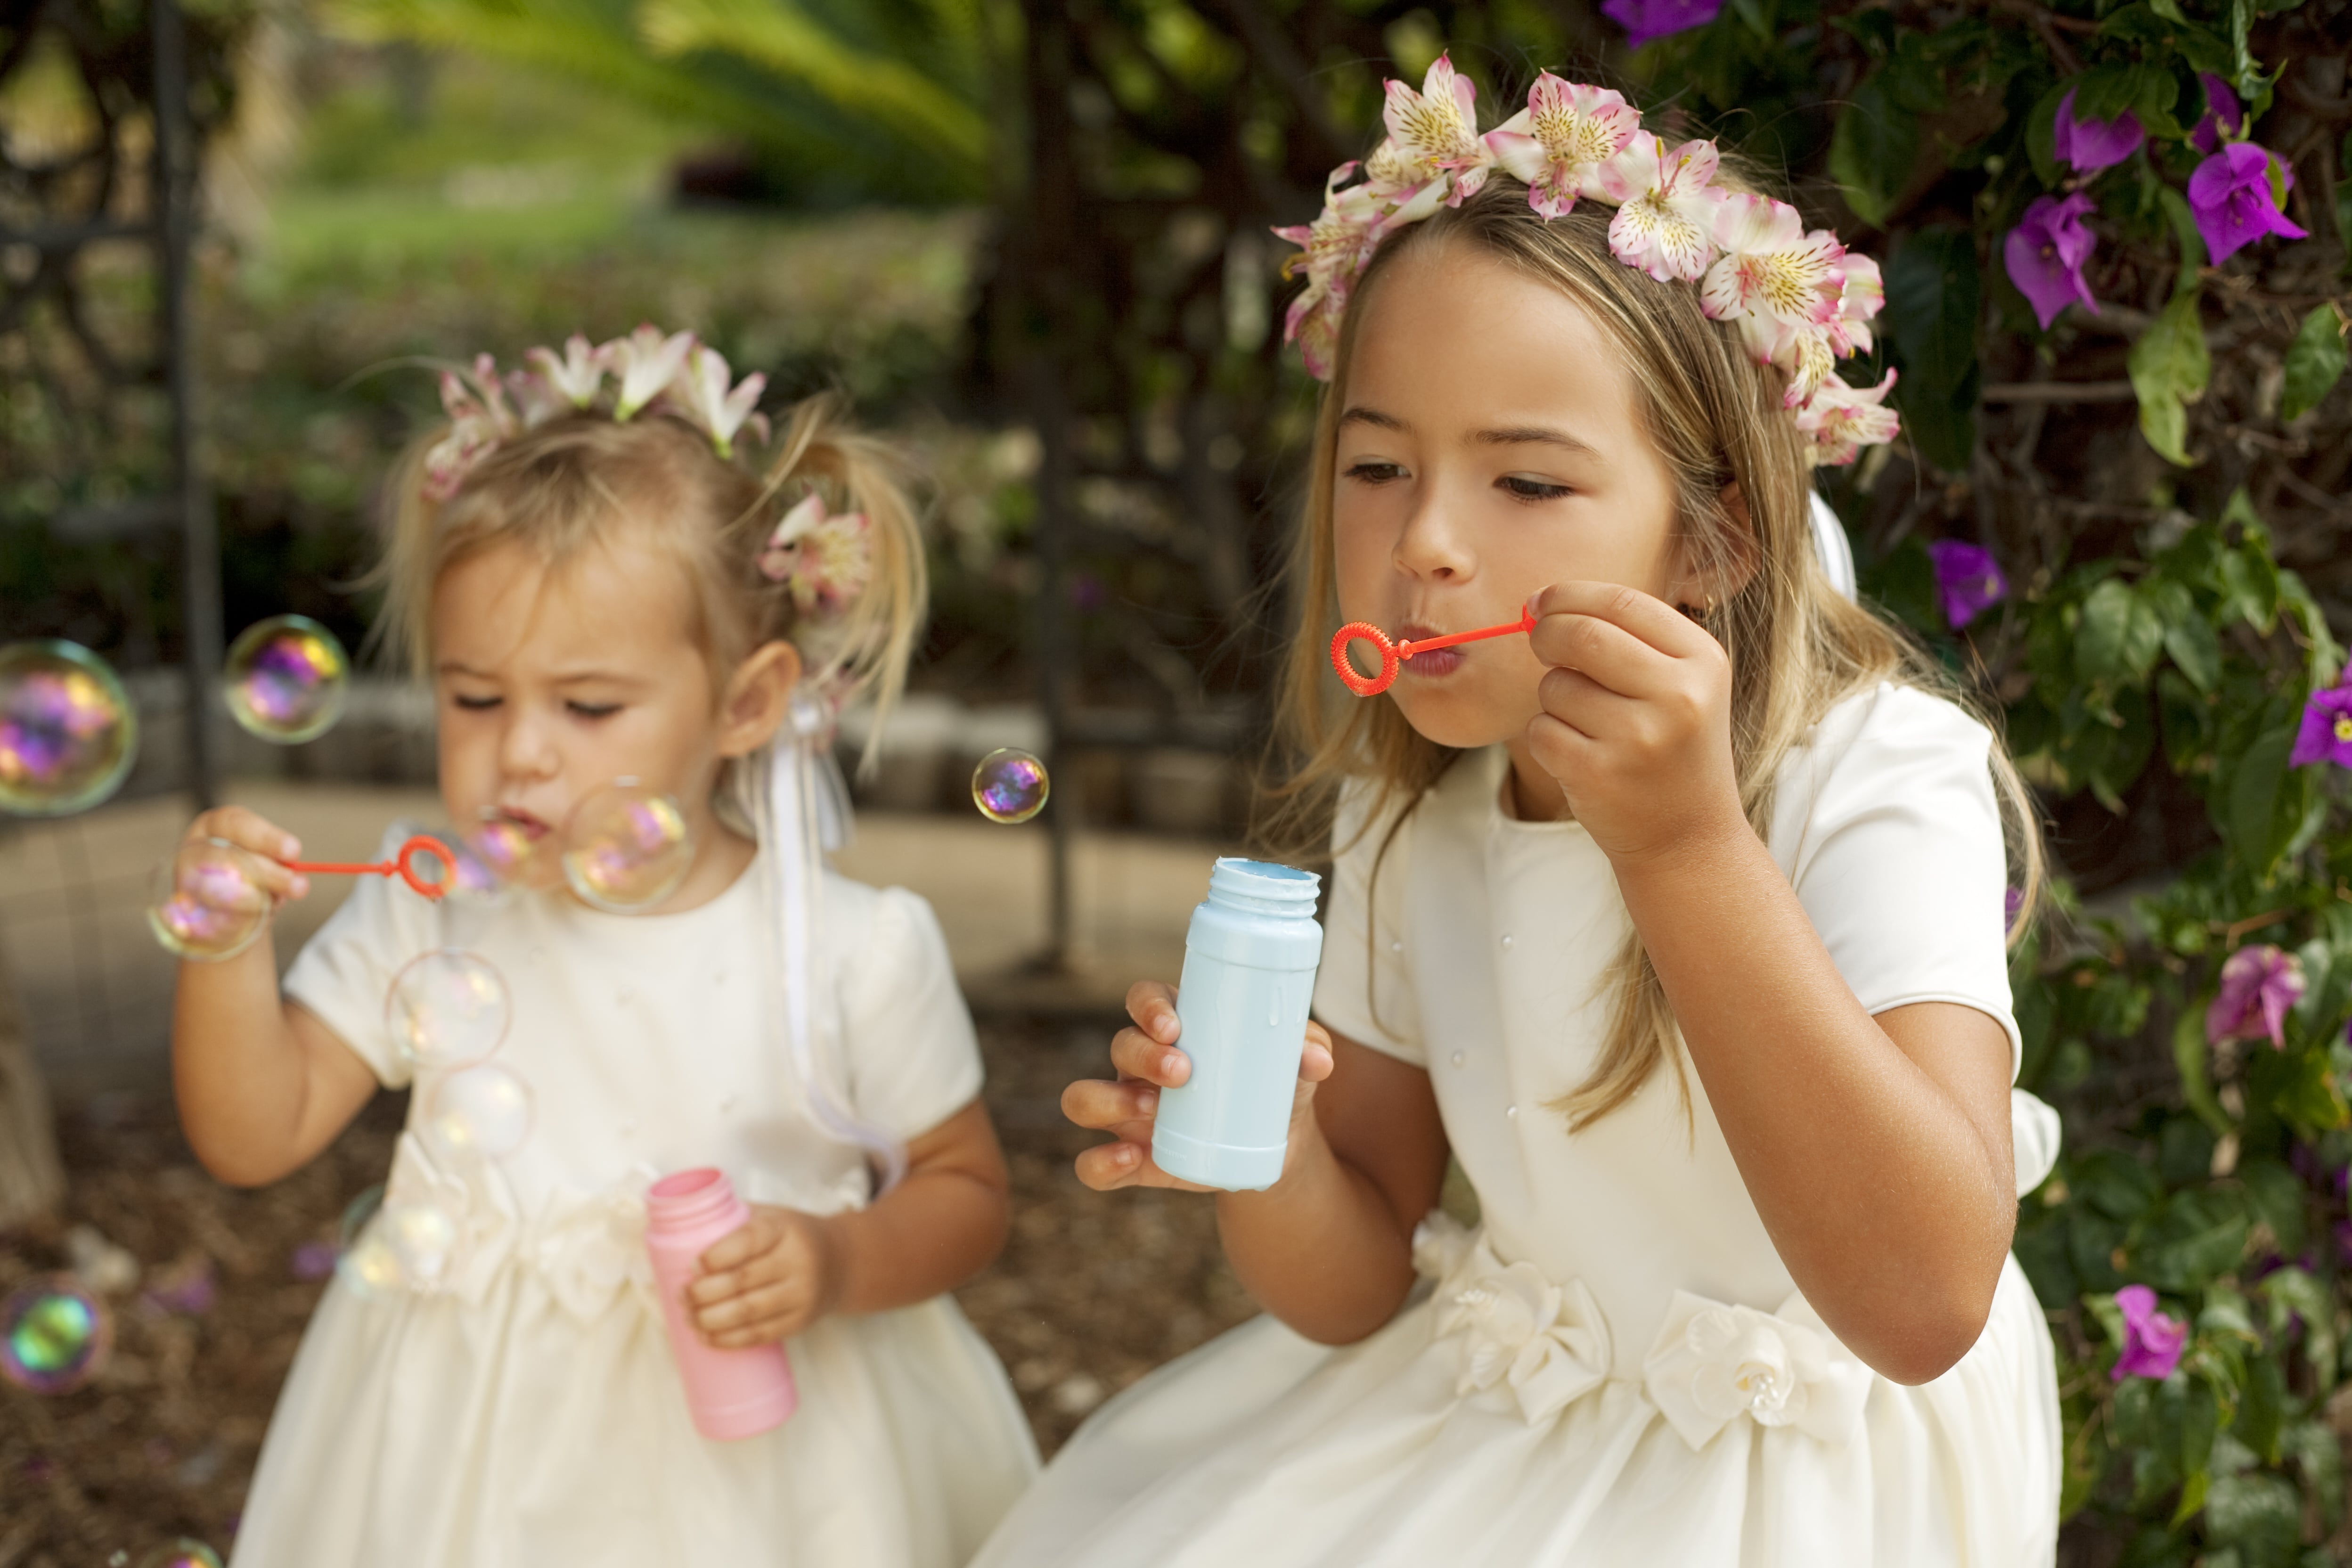 These adorable grandmothers are flower girls at wedding